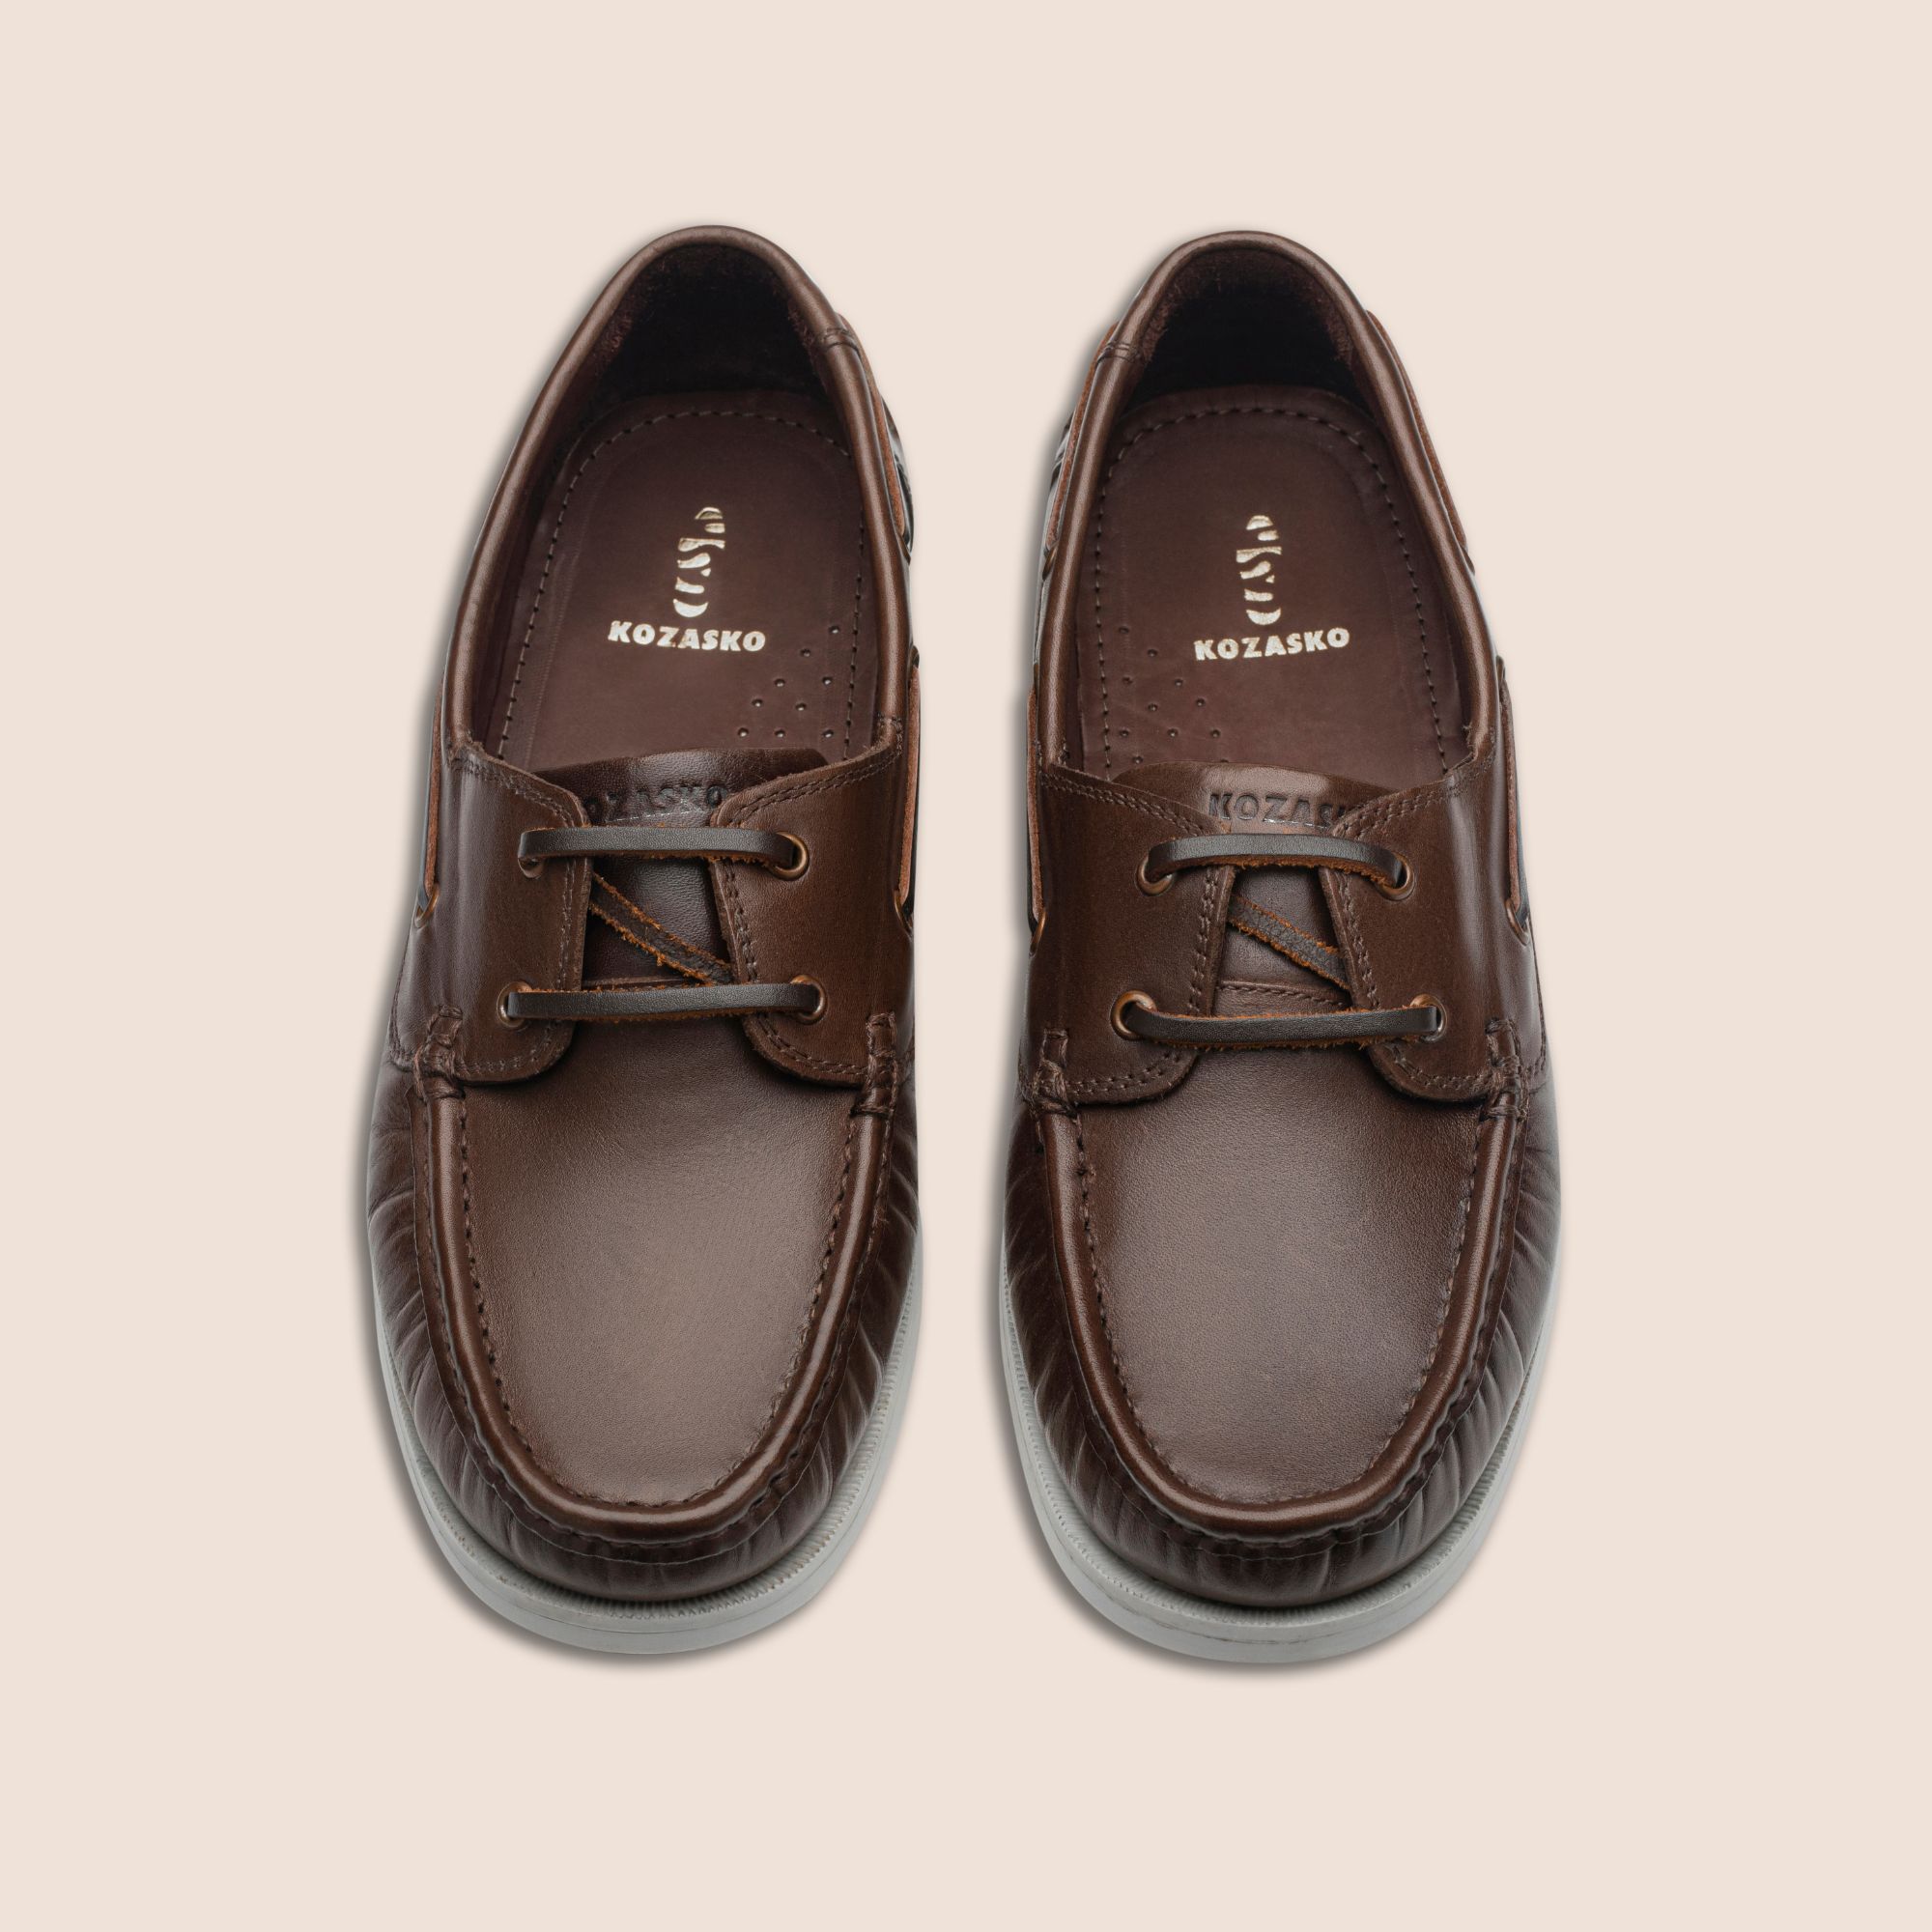 Blake Stitched brown Leather boat shoes for men